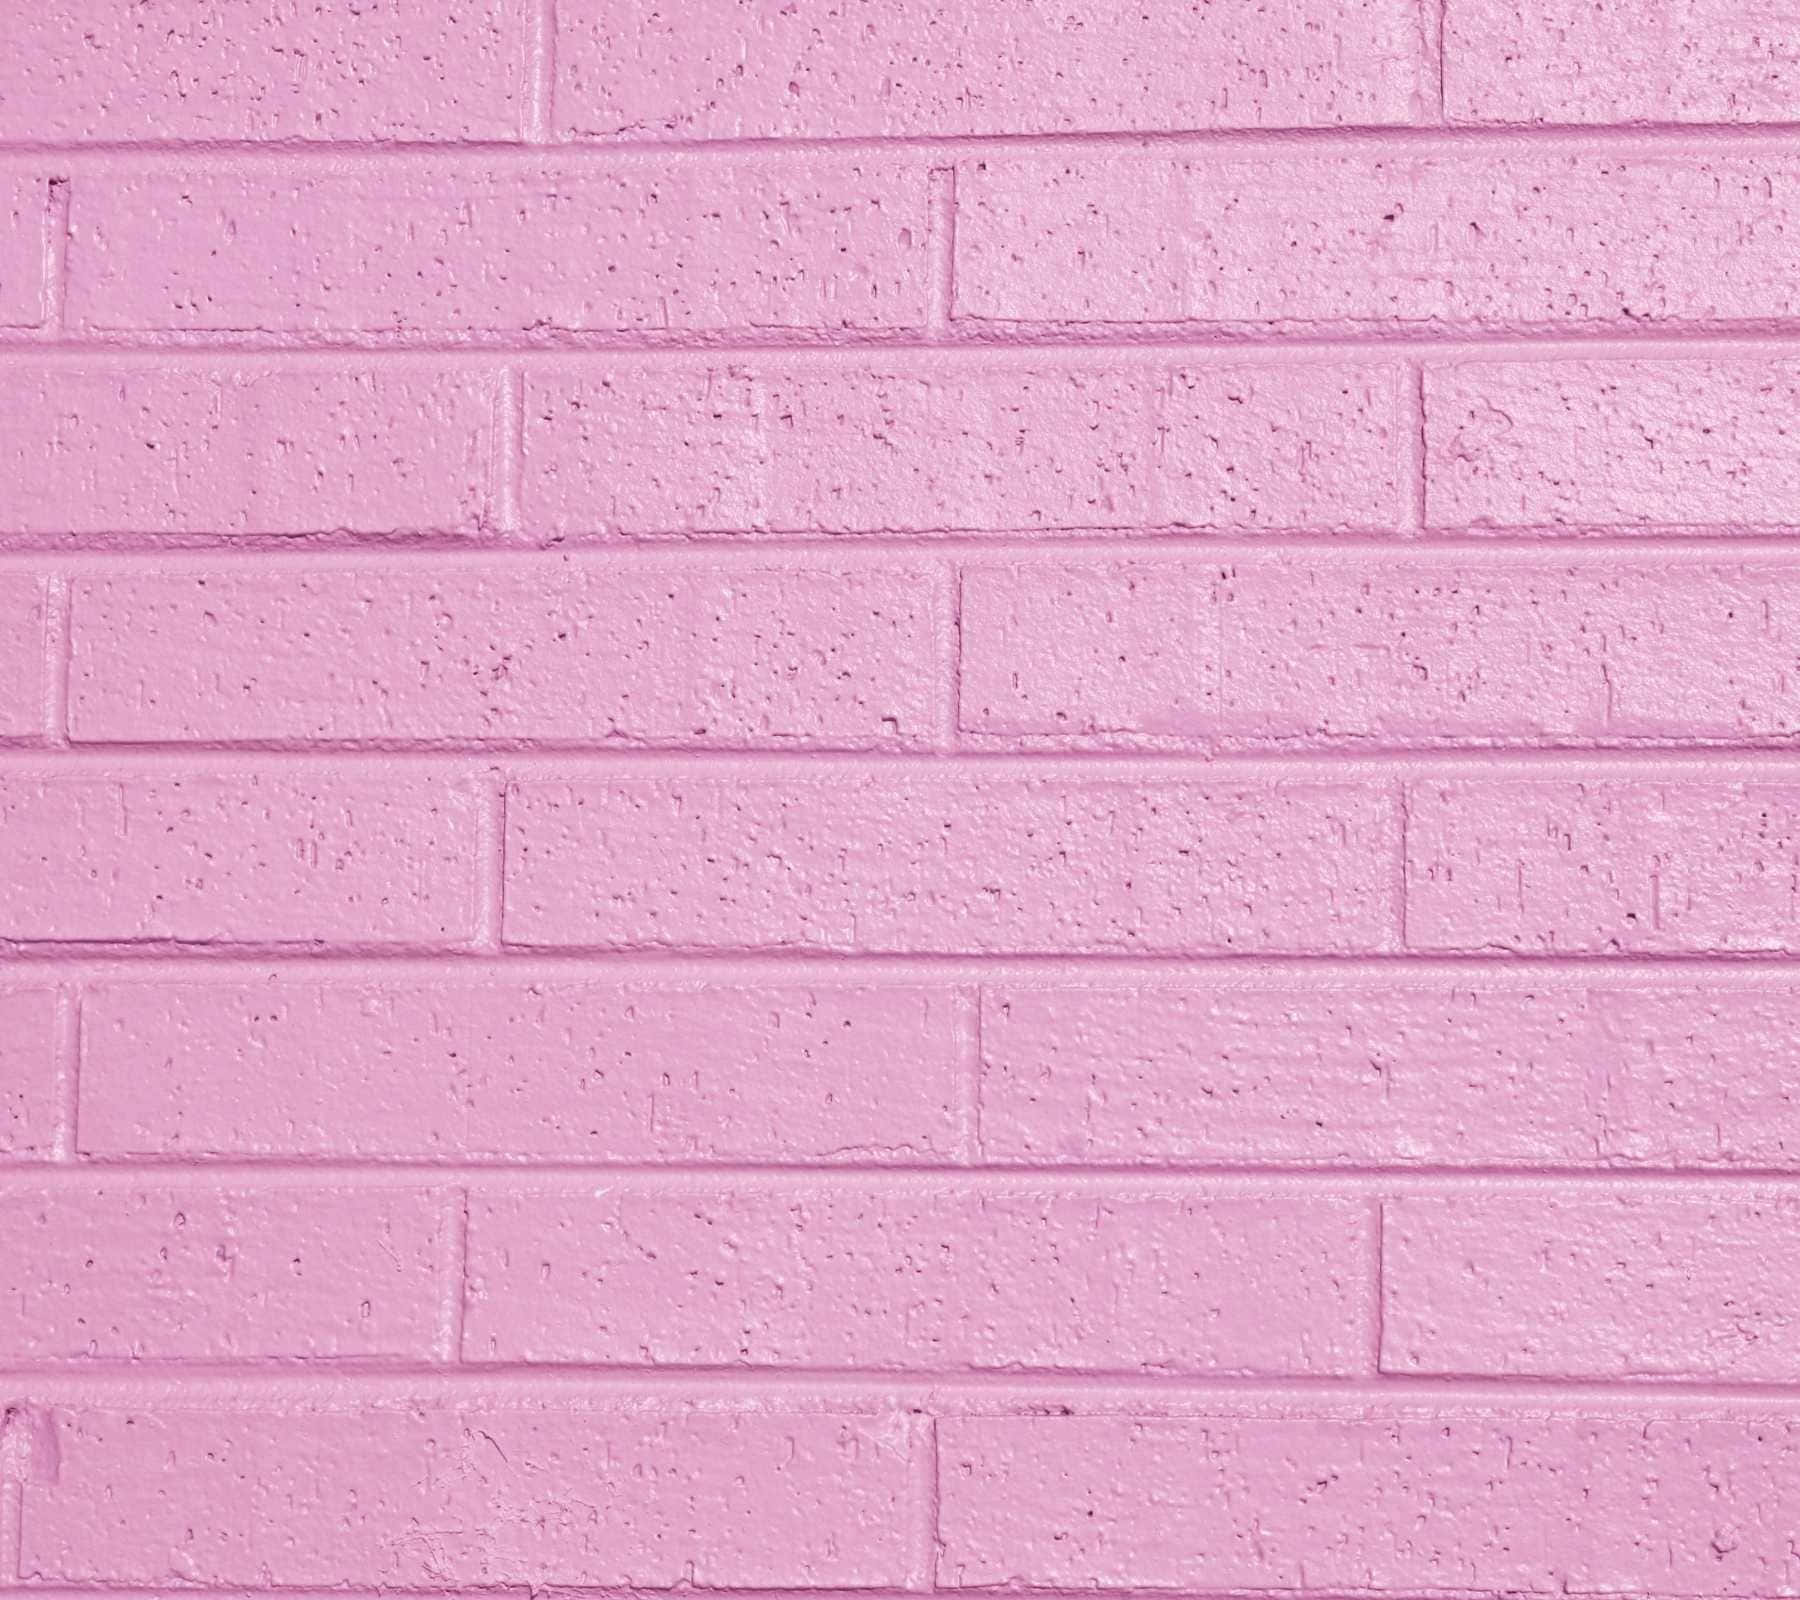 A Shiny Pink Background to Brighten Up Your Tumblr